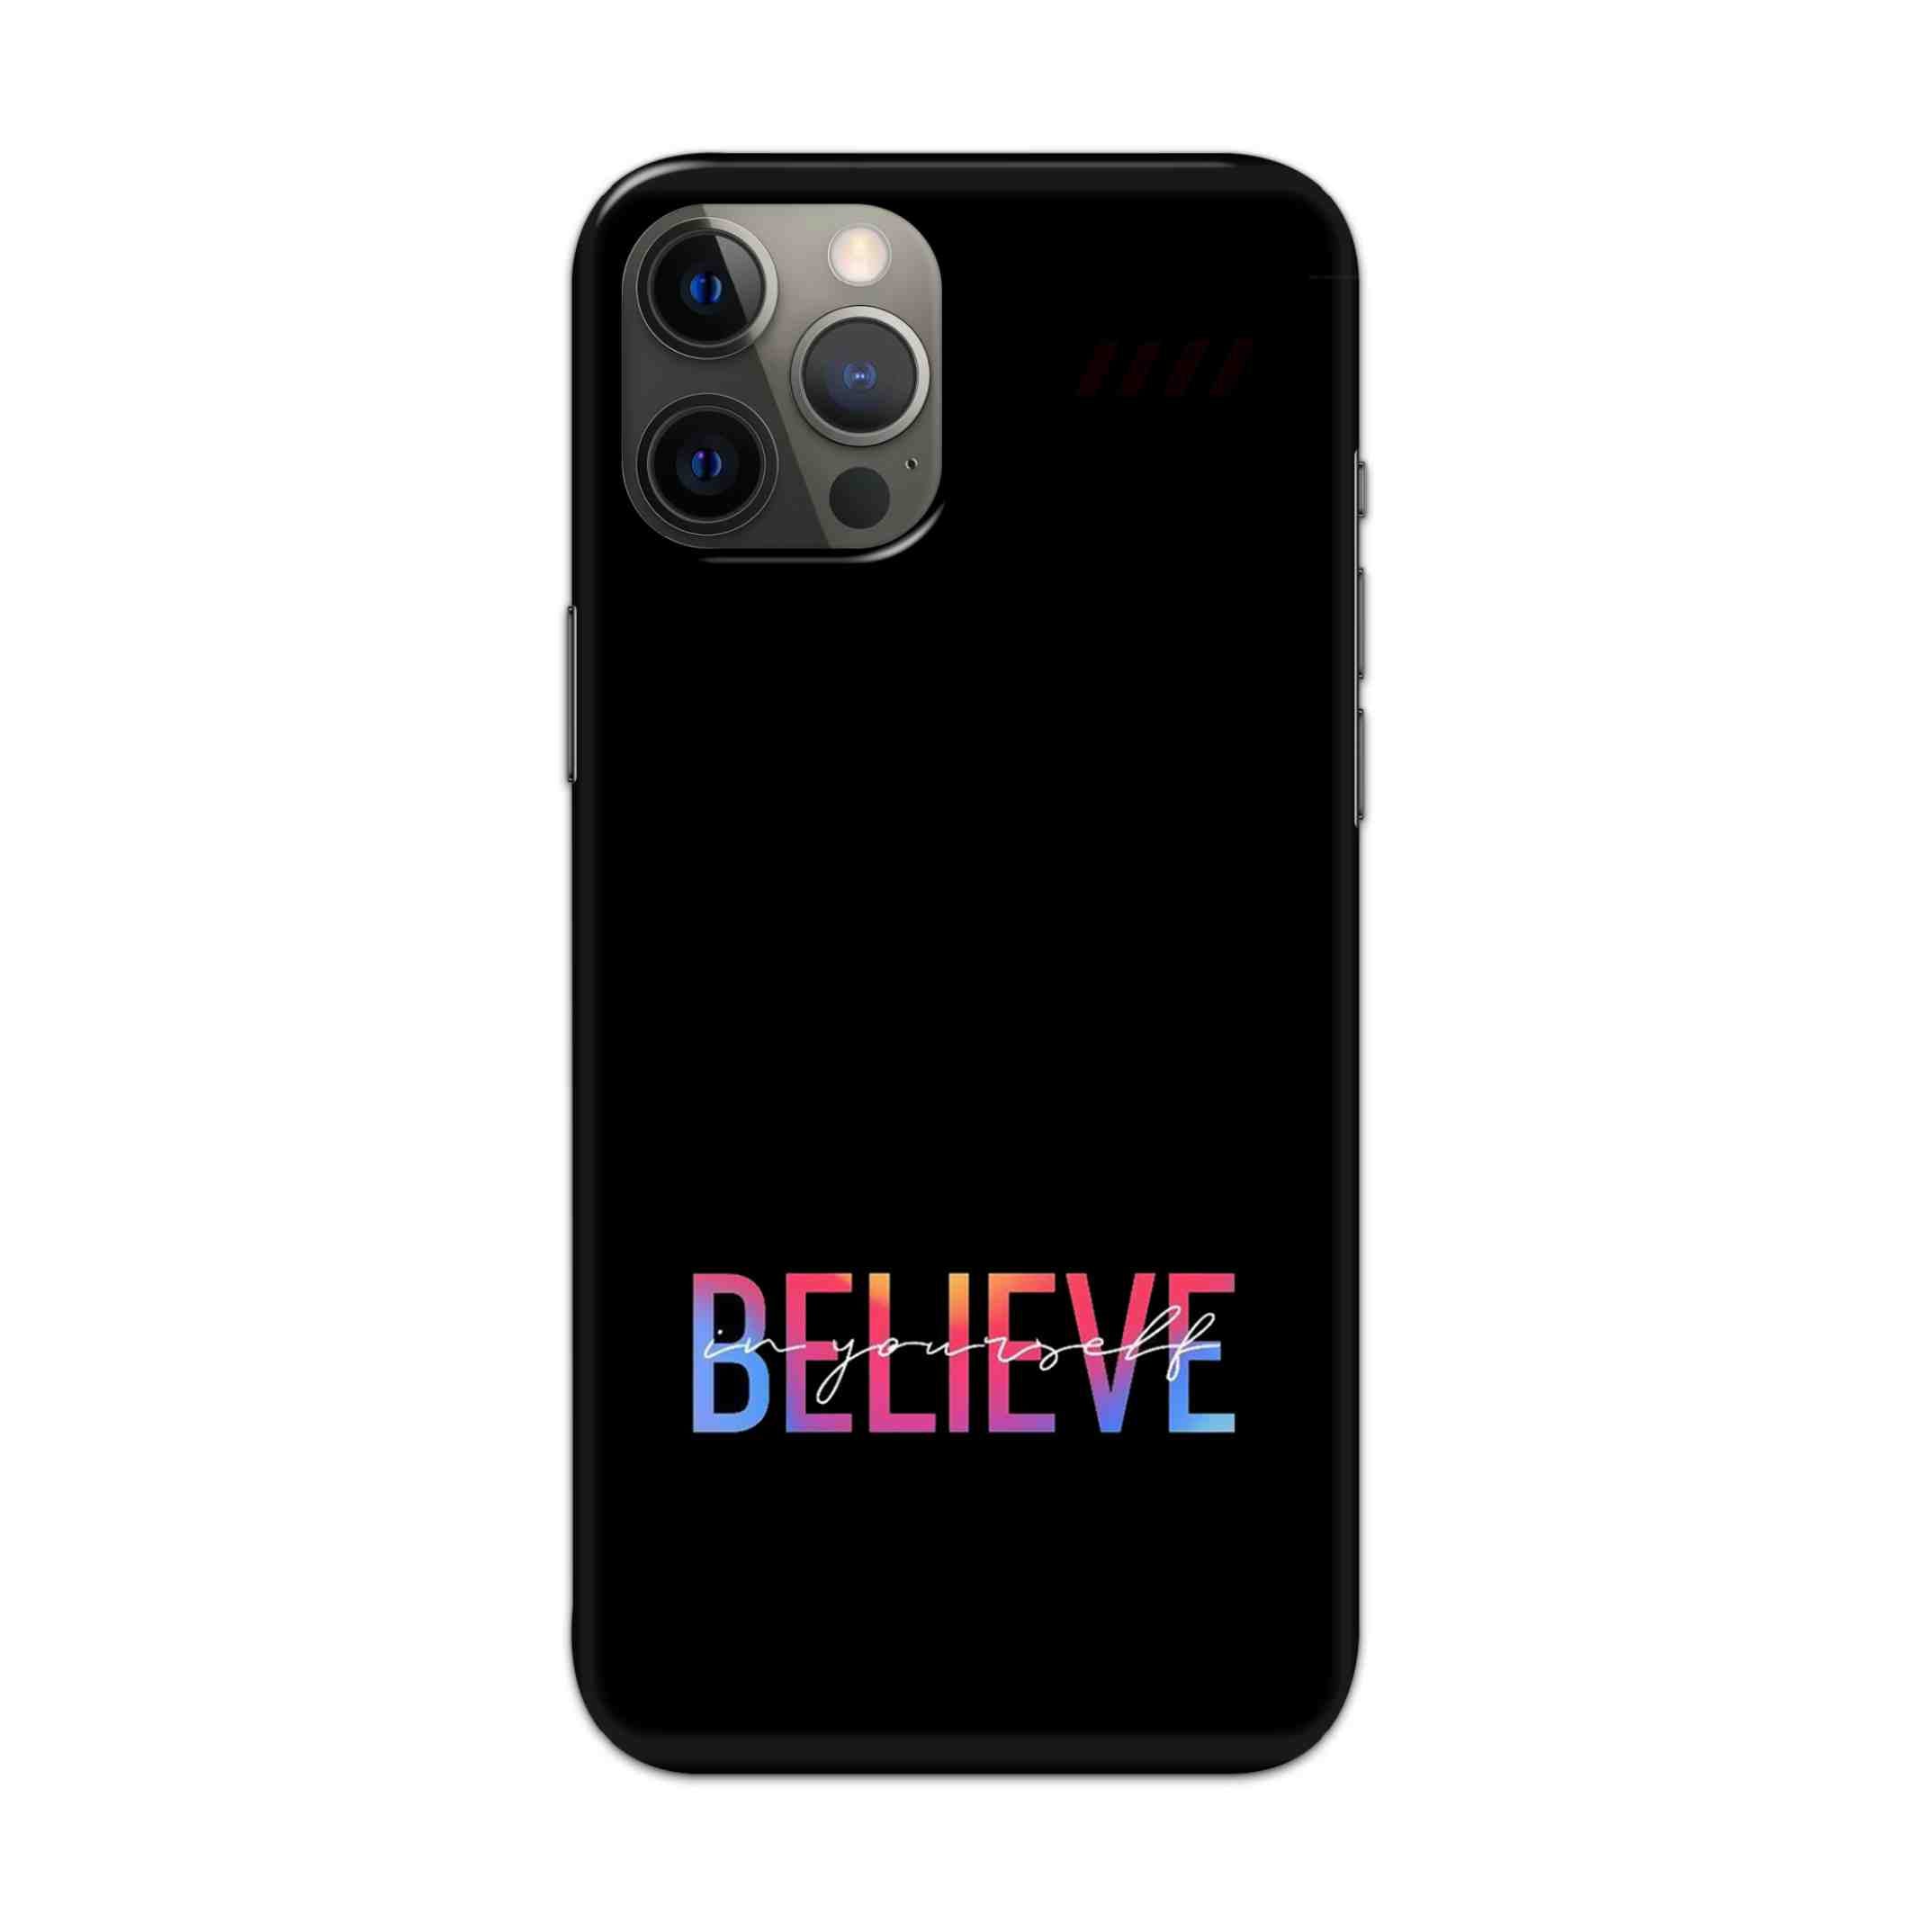 Buy Believe Hard Back Mobile Phone Case/Cover For Apple iPhone 12 pro max Online